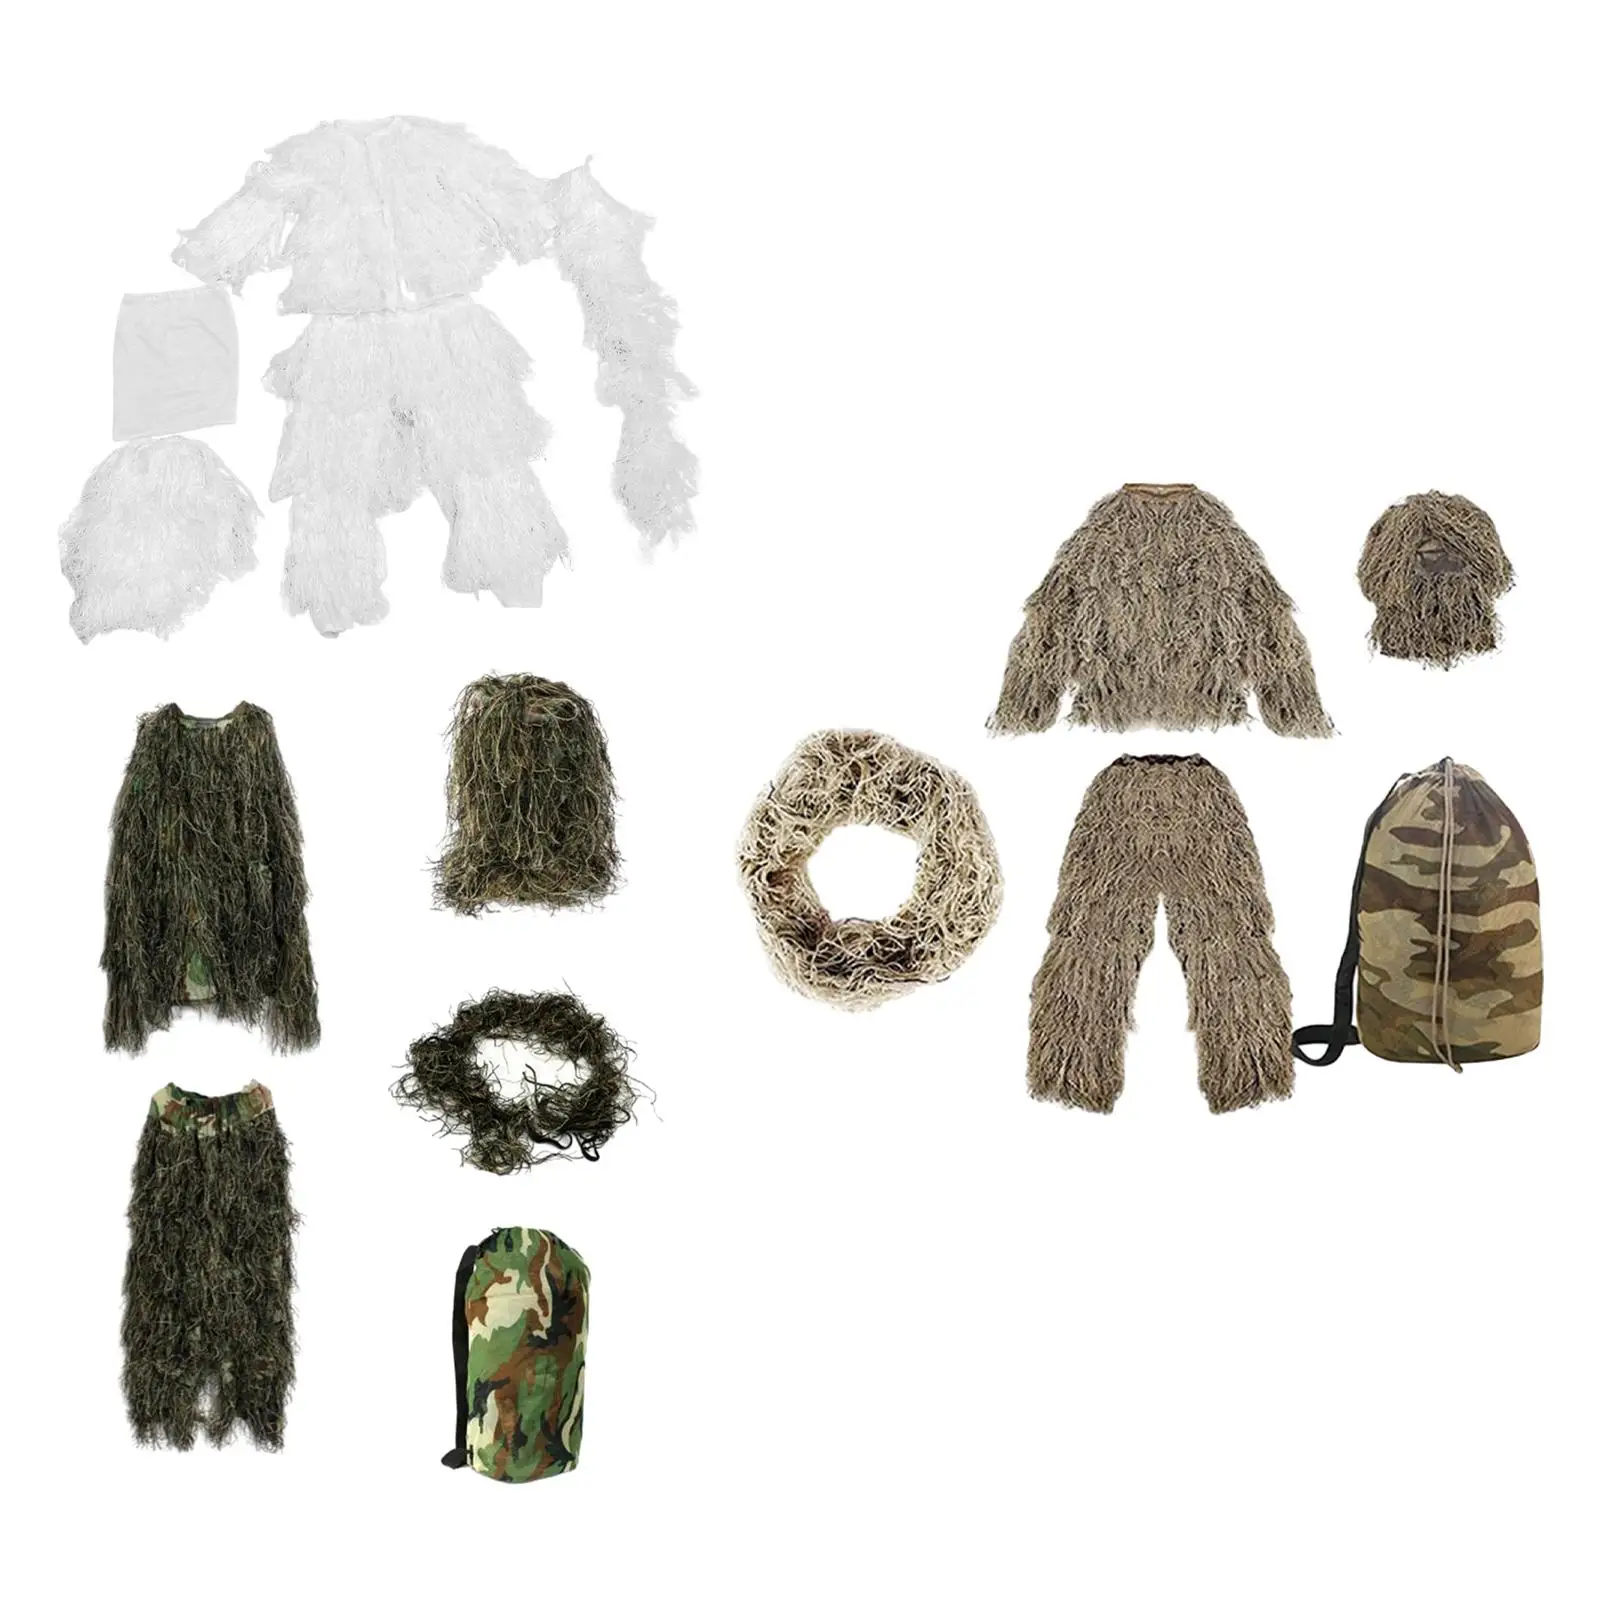 Kids Ghillie Suit Outfit Woodland Clothes Lightweight Clothing Uniform Set for Game Photography Camping Birdwatching Jungle